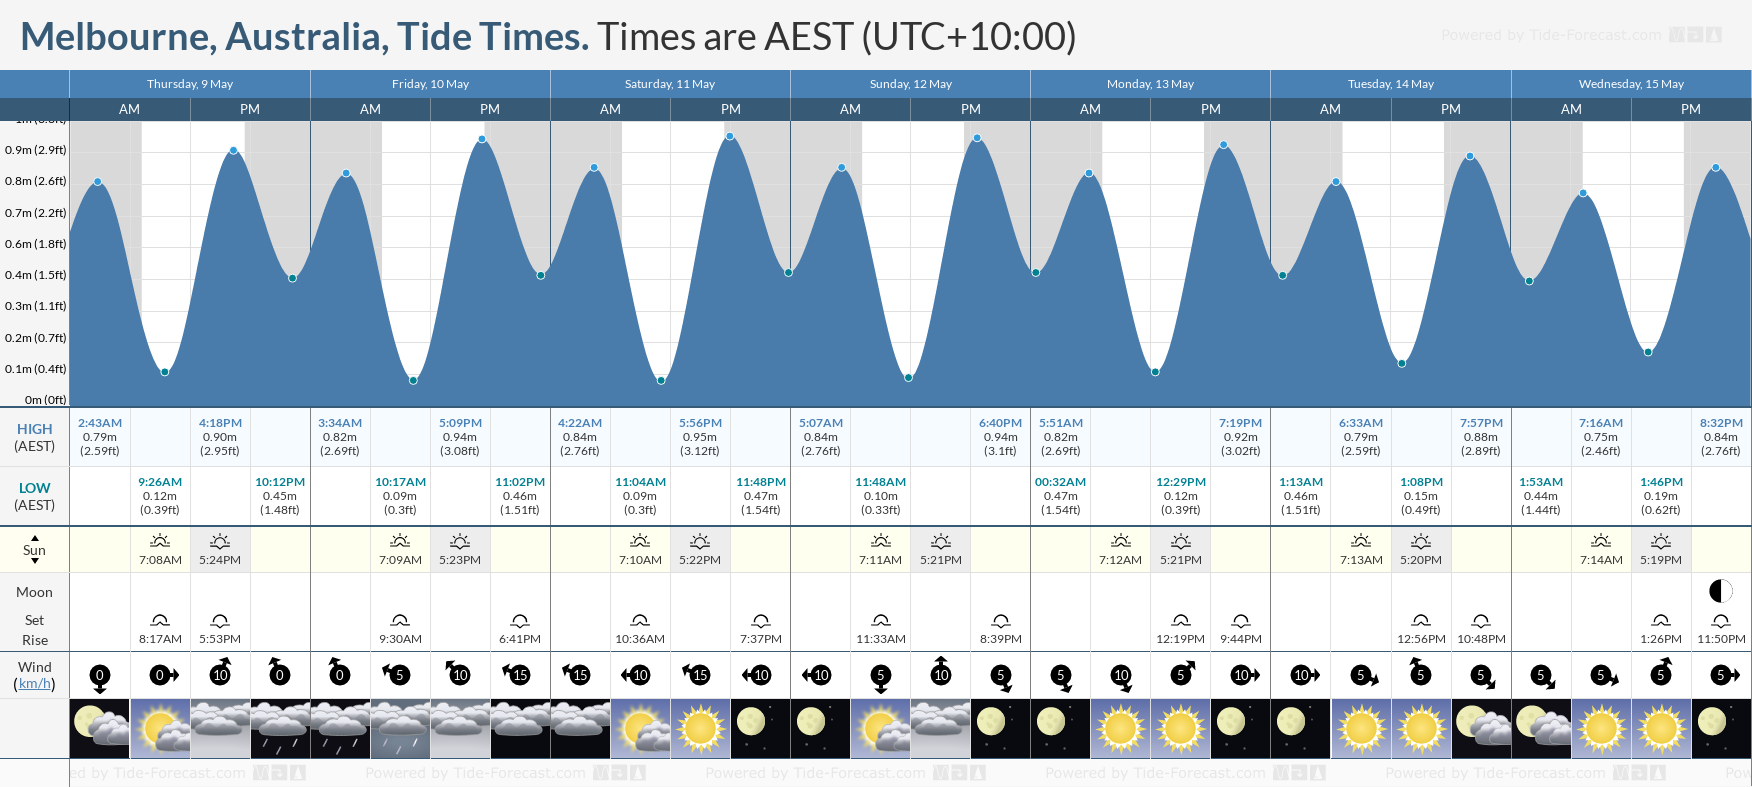 Melbourne, Australia Tide Chart including high and low tide tide times for the next 7 days